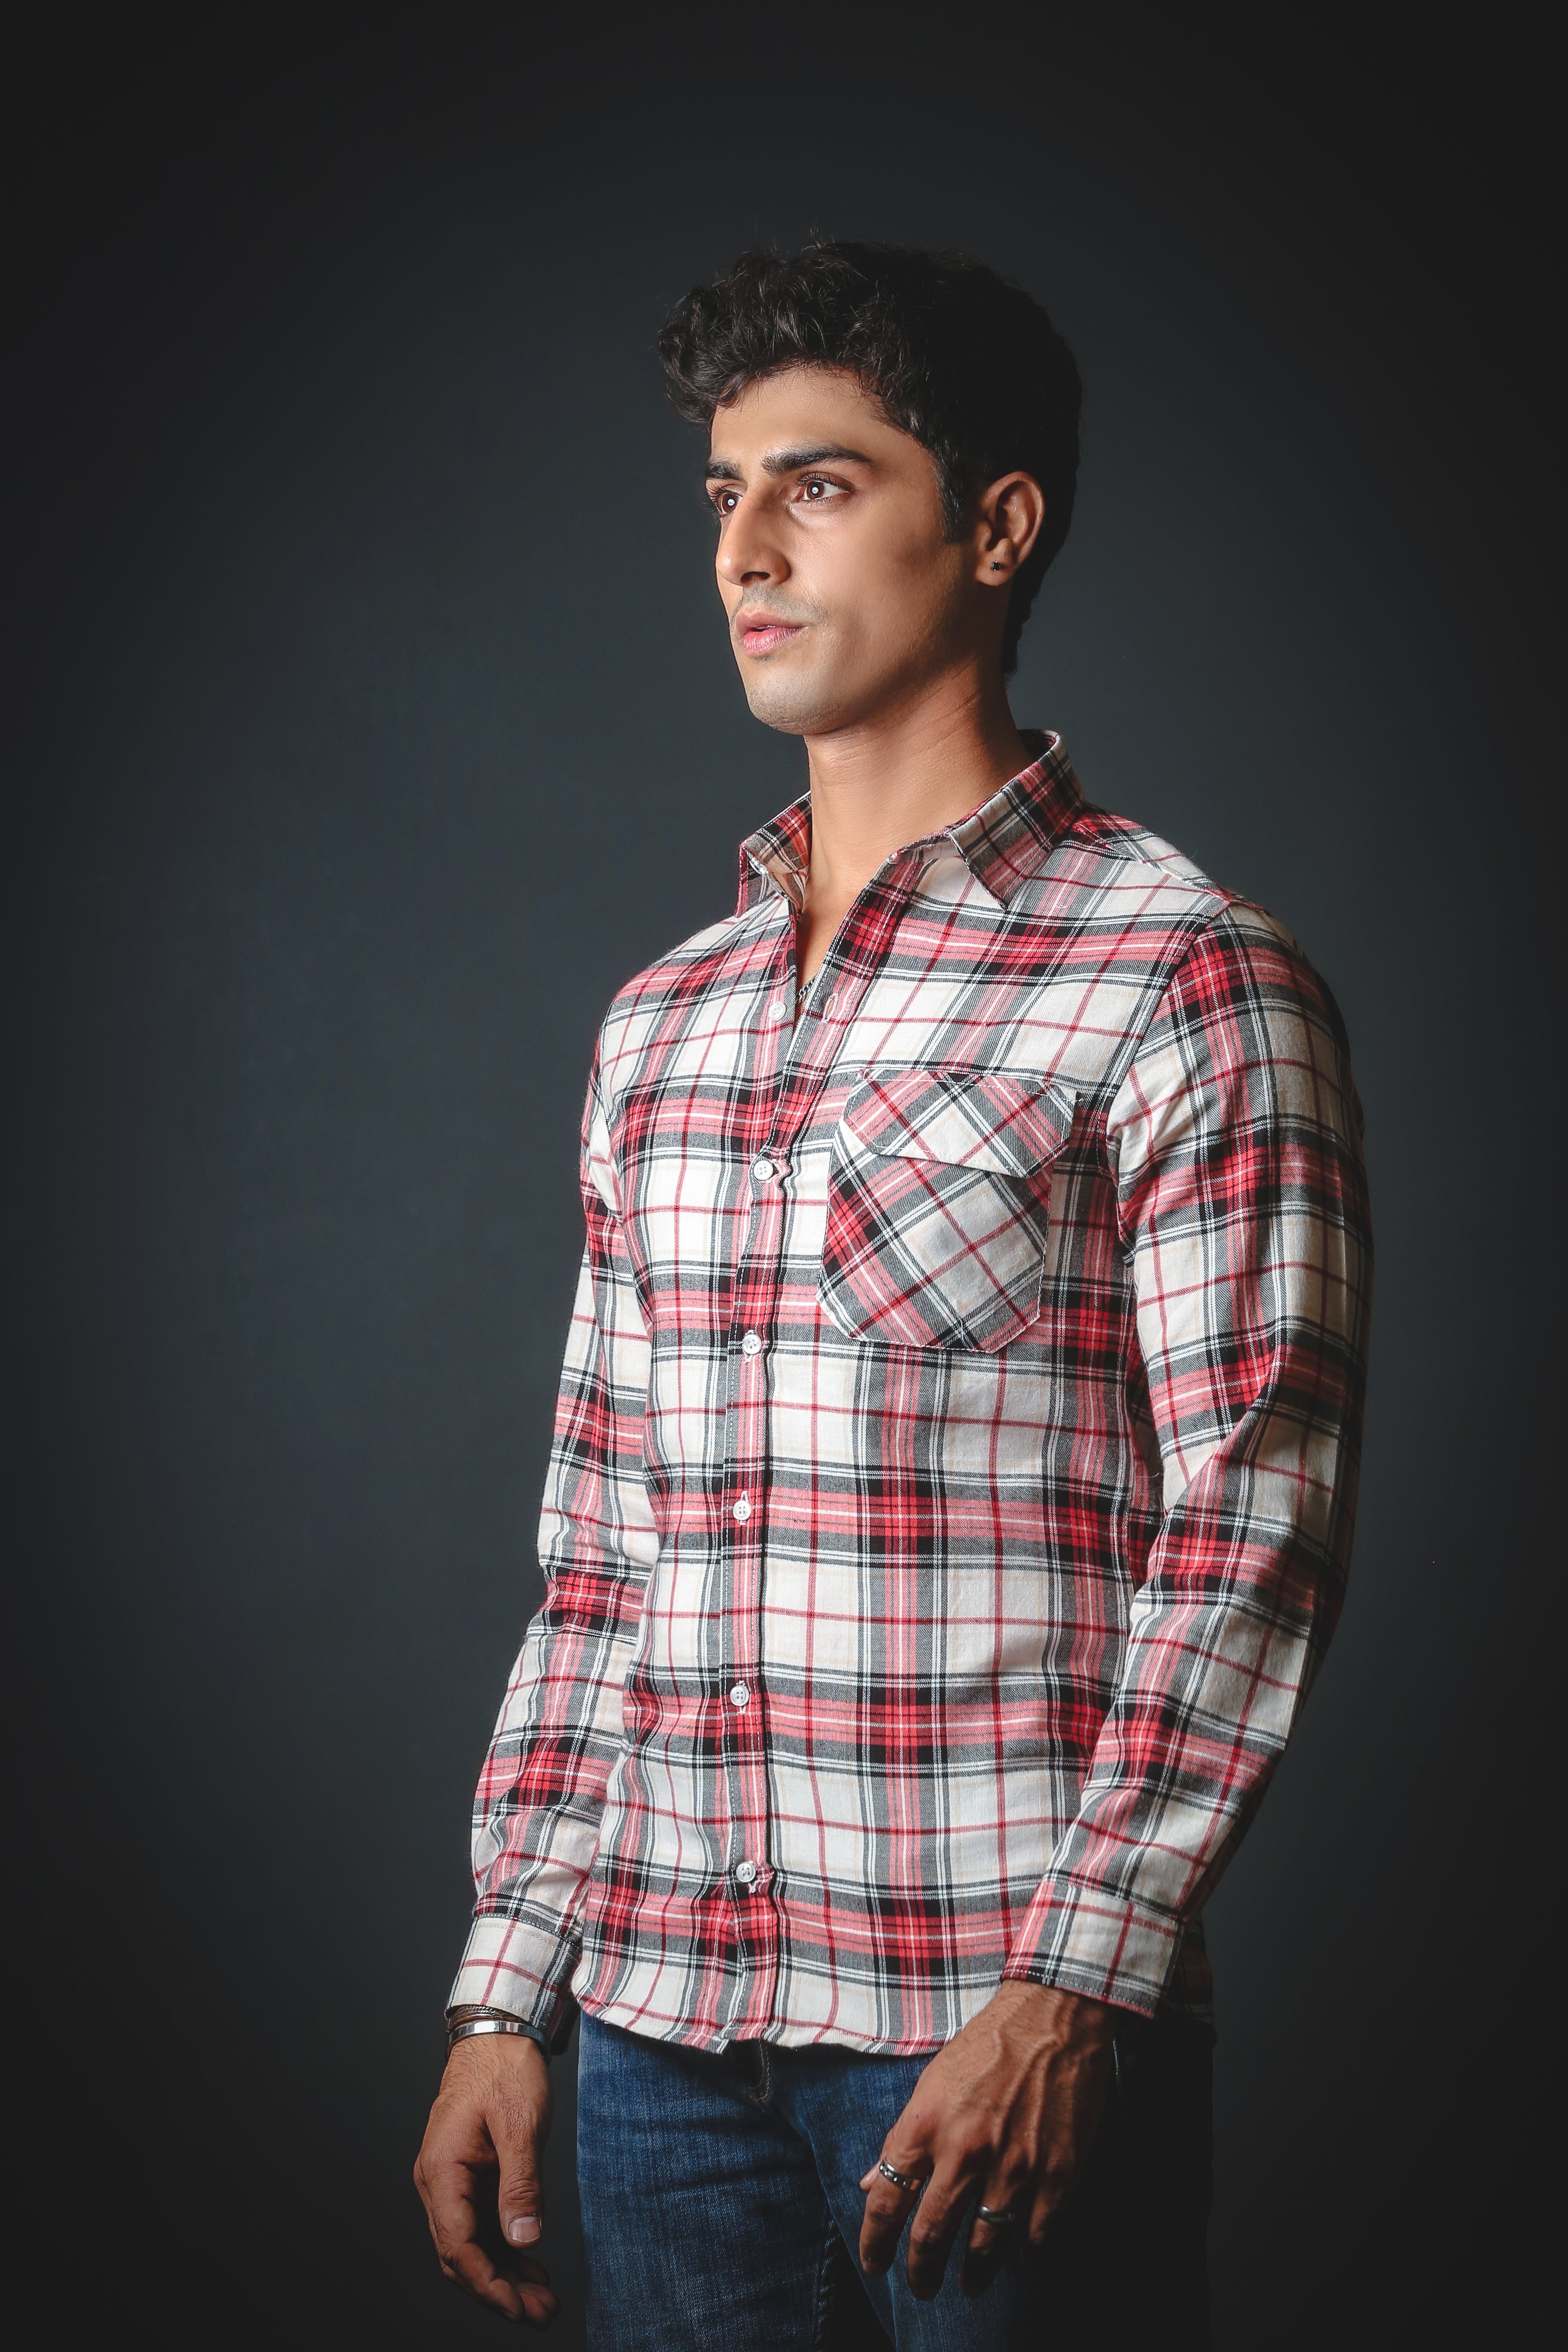 Red Flannel Shirts